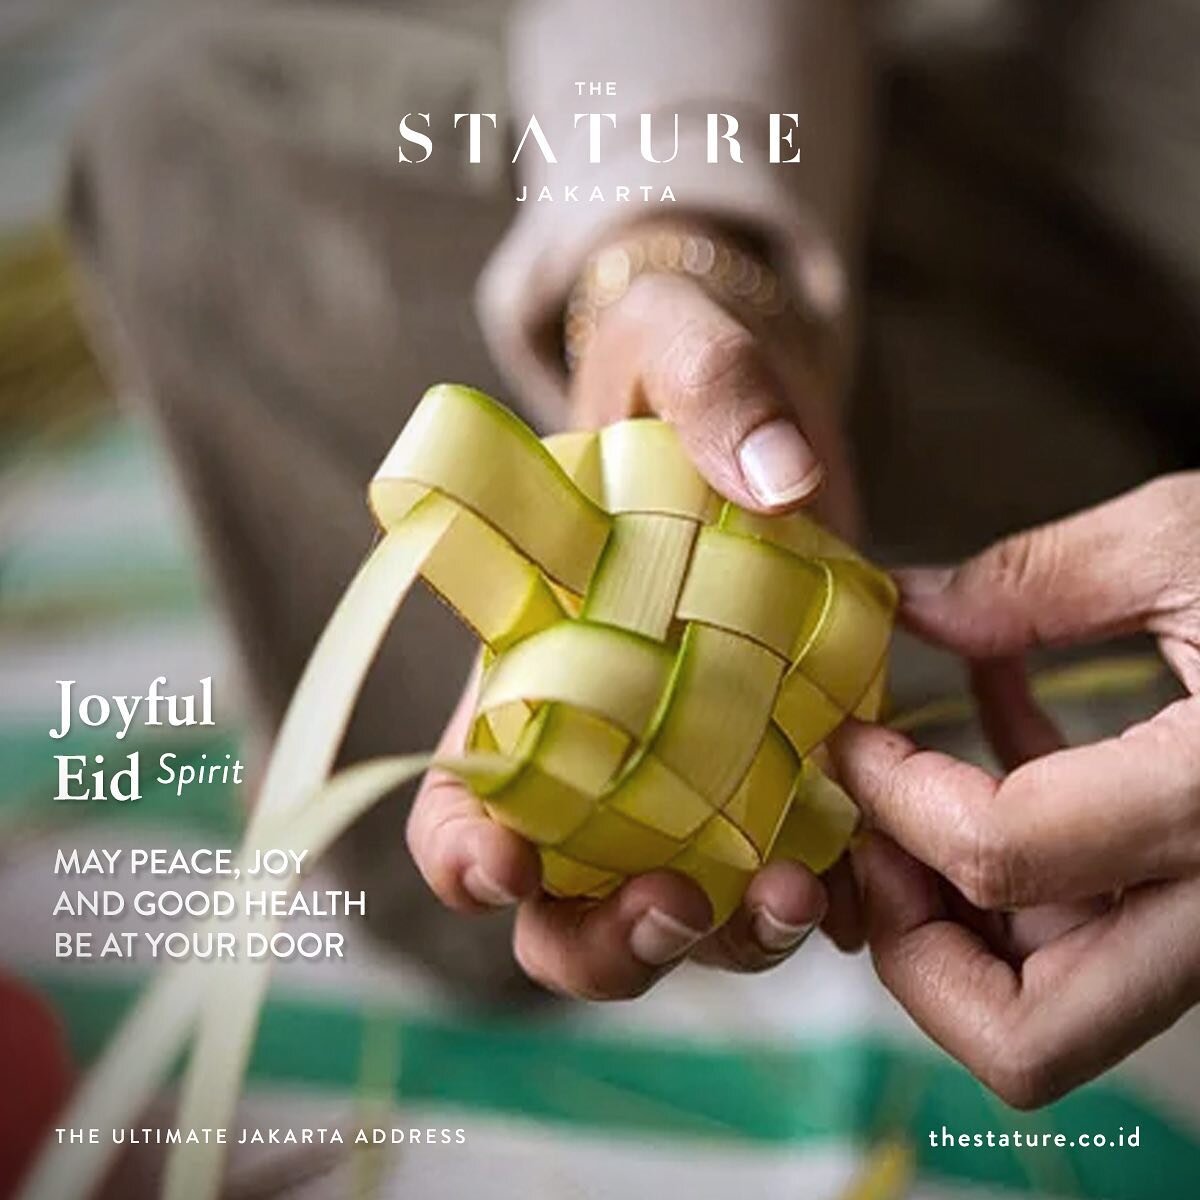 Eid Mubarak from The Stature Jakarta team!

May this joyous occasion bring you peace, happiness and prosperity. Wishing you and your loved ones a blessed and memorable Eid celebration.

𝗧𝗵𝗲 𝗦𝘁𝗮𝘁𝘂𝗿𝗲 𝗝𝗮𝗸𝗮𝗿𝘁𝗮
Jl. Kebon Sirih Raya No. 45